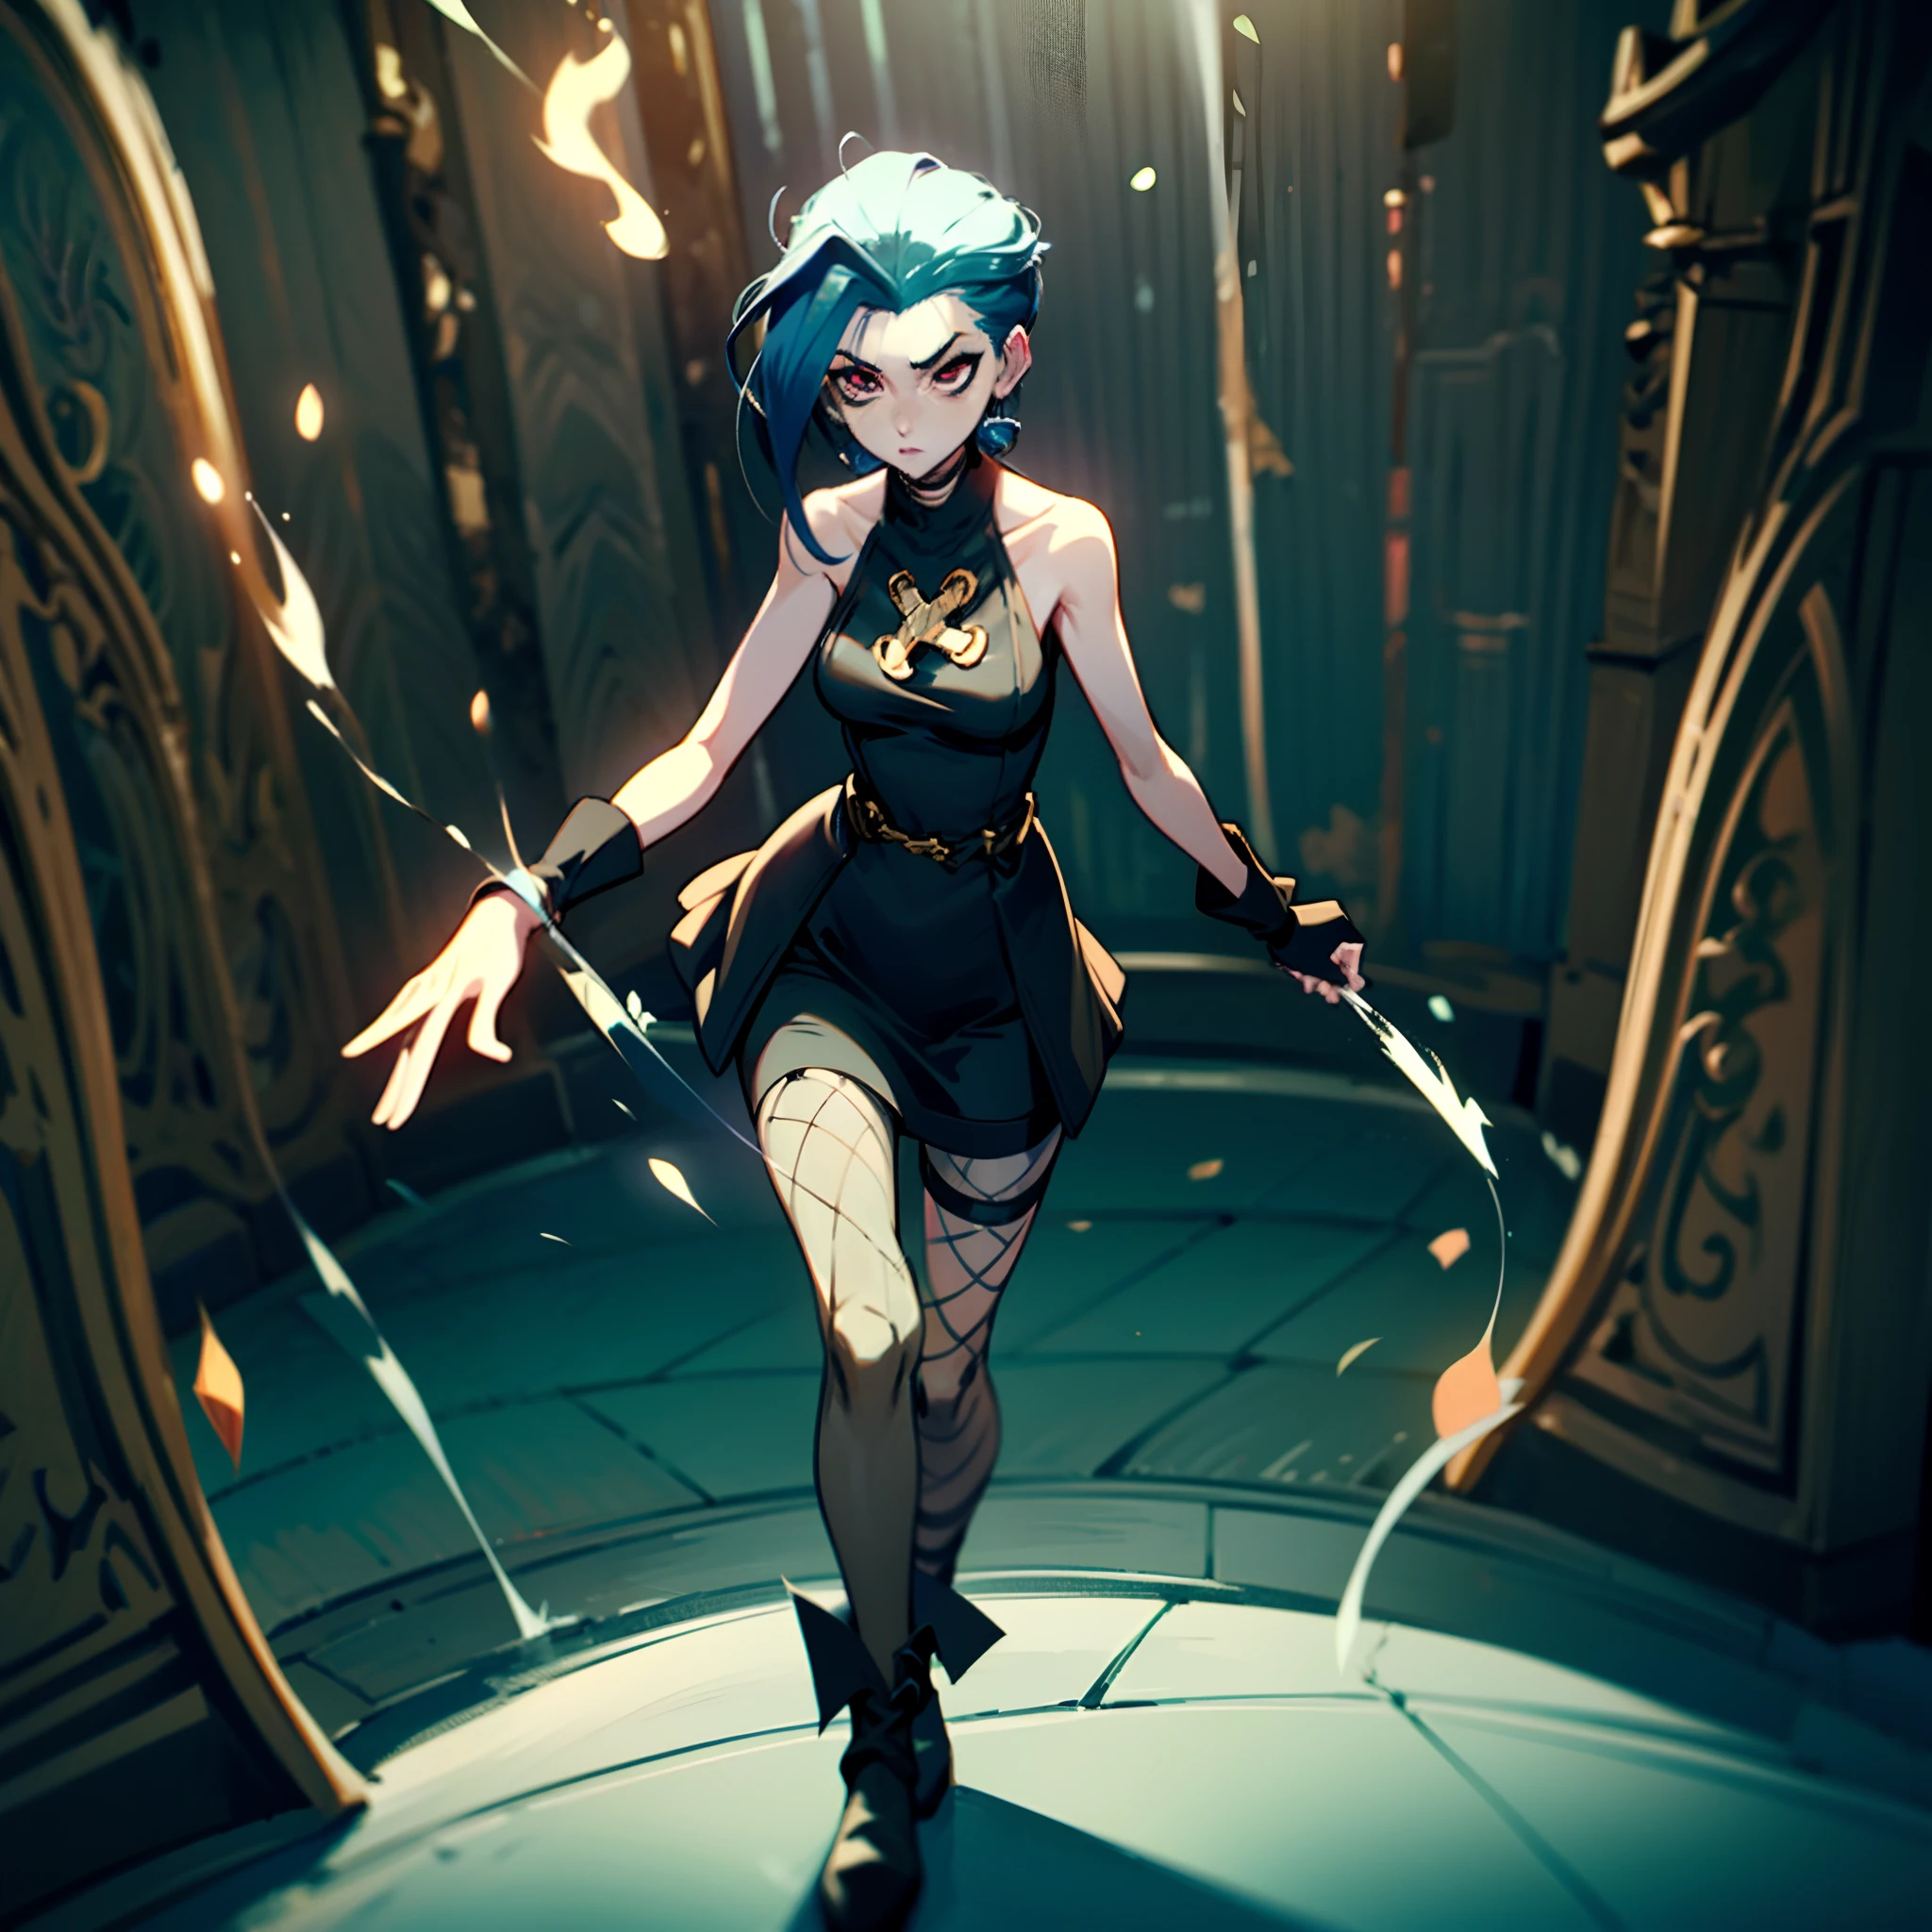 Full body of the character，The character has a large range of movement，The character is Jinx in League of Legends，blue hairs，On the streets of Zuan，Flame it up，Be red in the face，Have dark circles，guffaw，Solicit business for the brothel behind you，Dress up as a bunny girl inside the casino，Wearing black fishnet stockings，The picture quality is clear